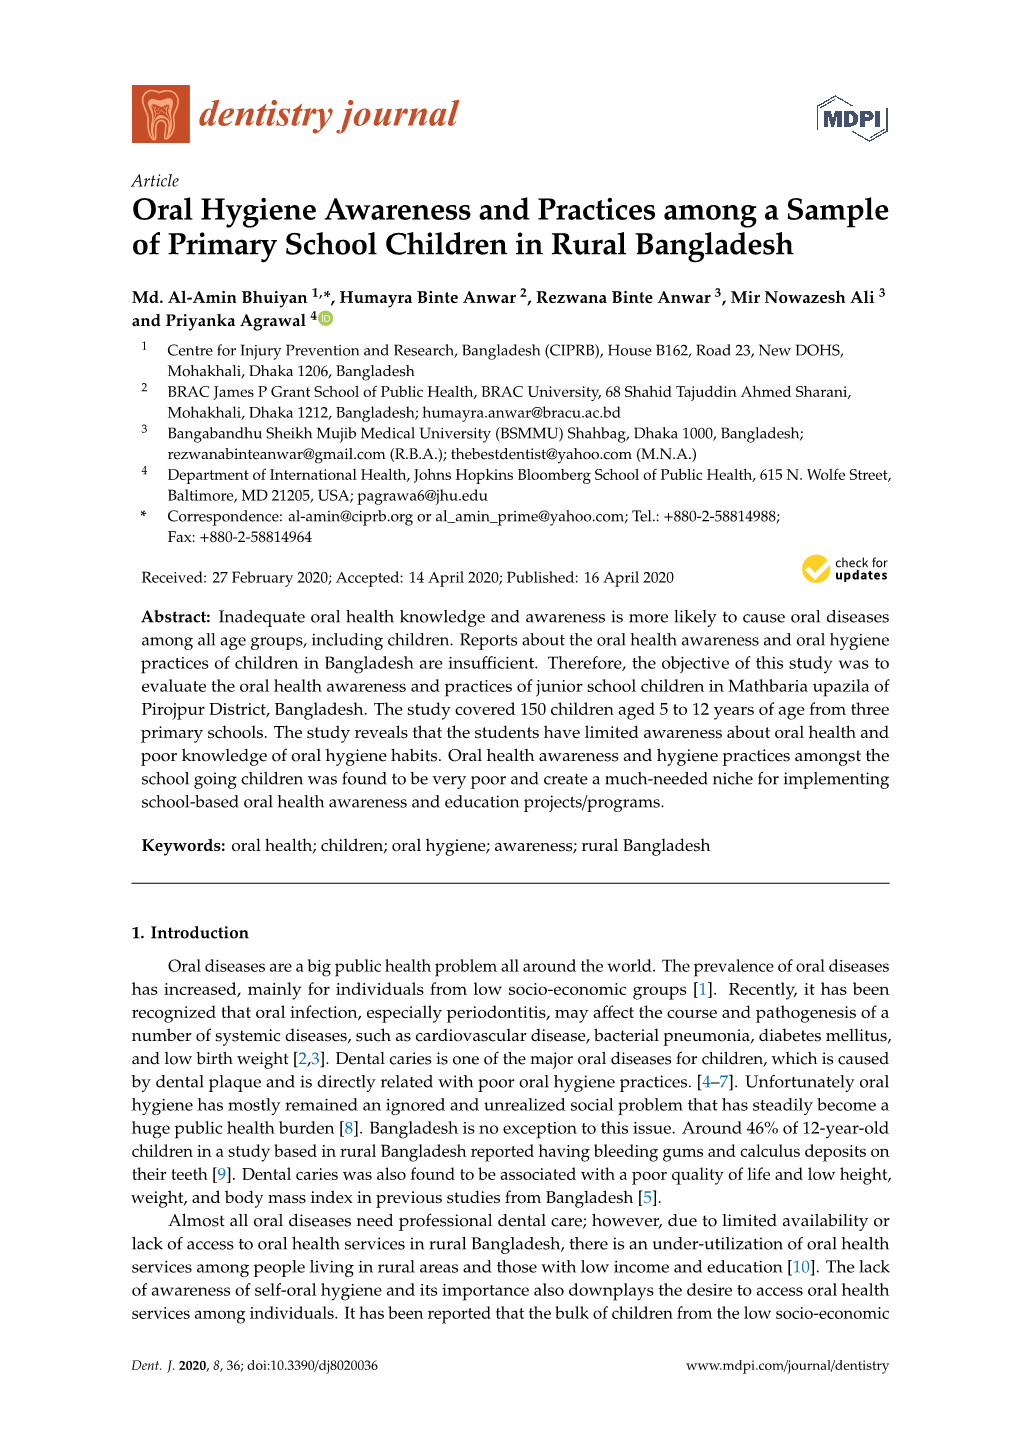 Oral Hygiene Awareness and Practices Among a Sample of Primary School Children in Rural Bangladesh